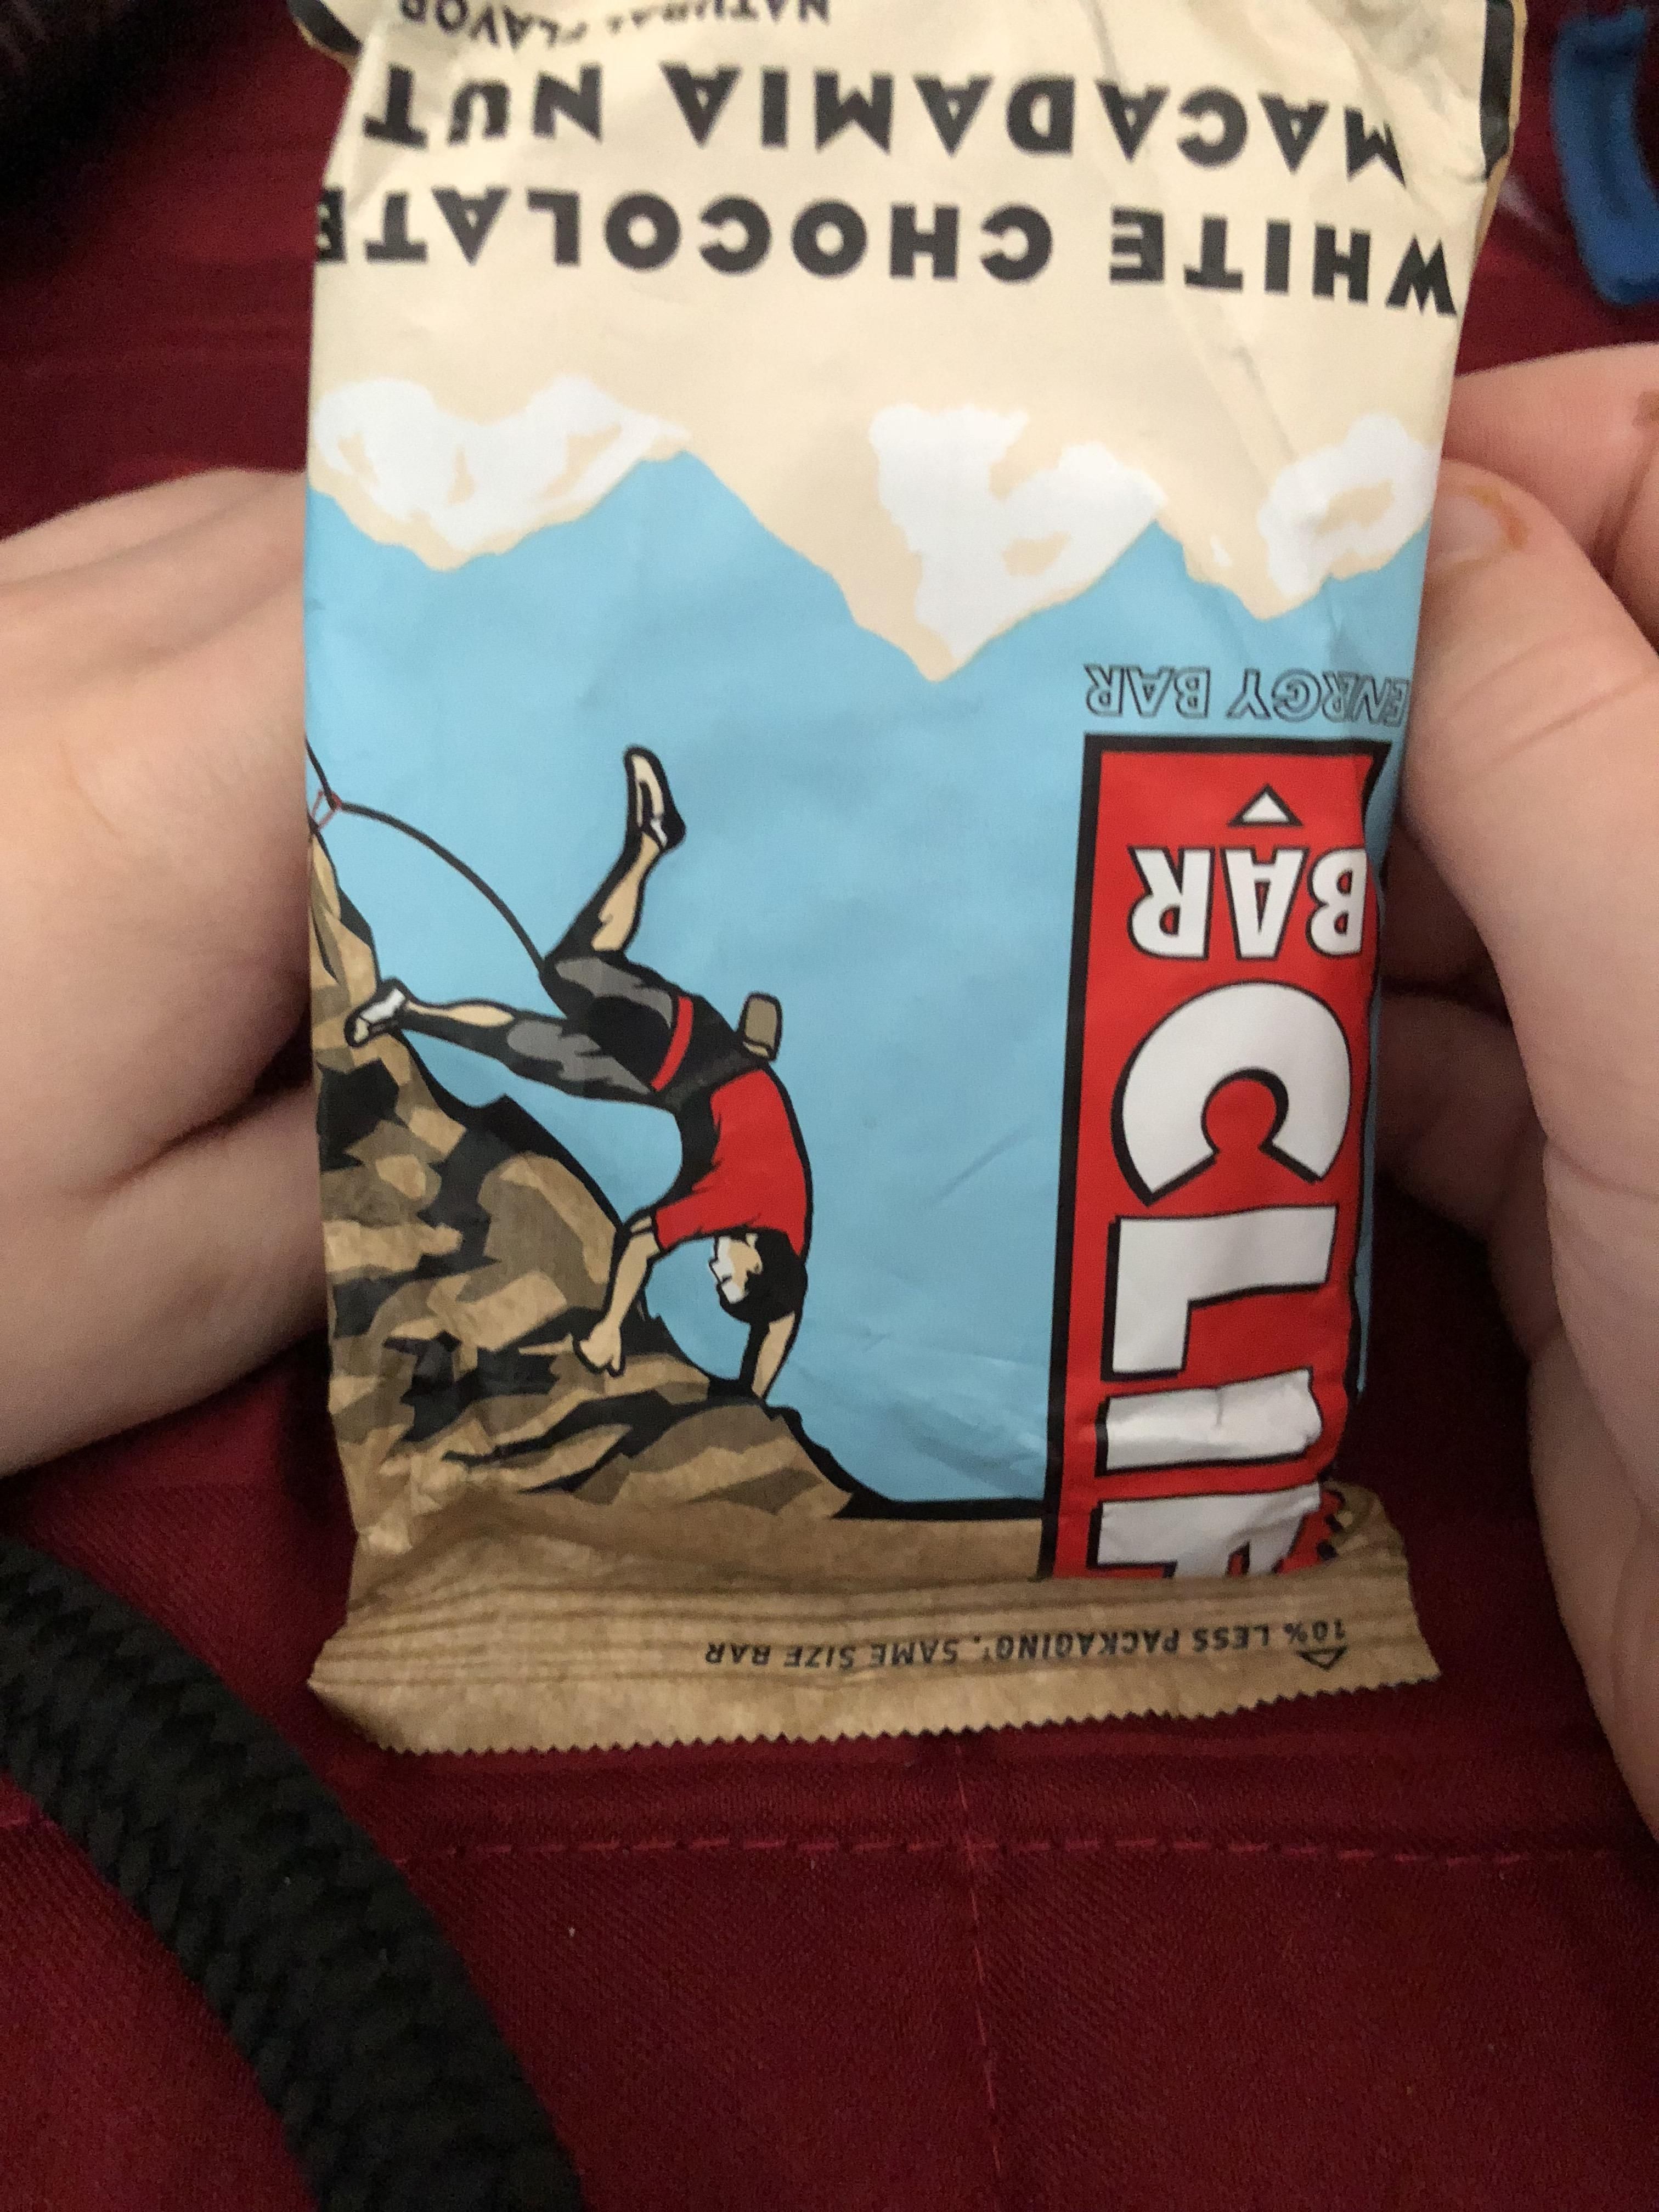 My Six Year Old Son Pointed Out When You Hold A Clif Bar Upside Down It Looks Like “The Last Moment Of That Guy’s Life”